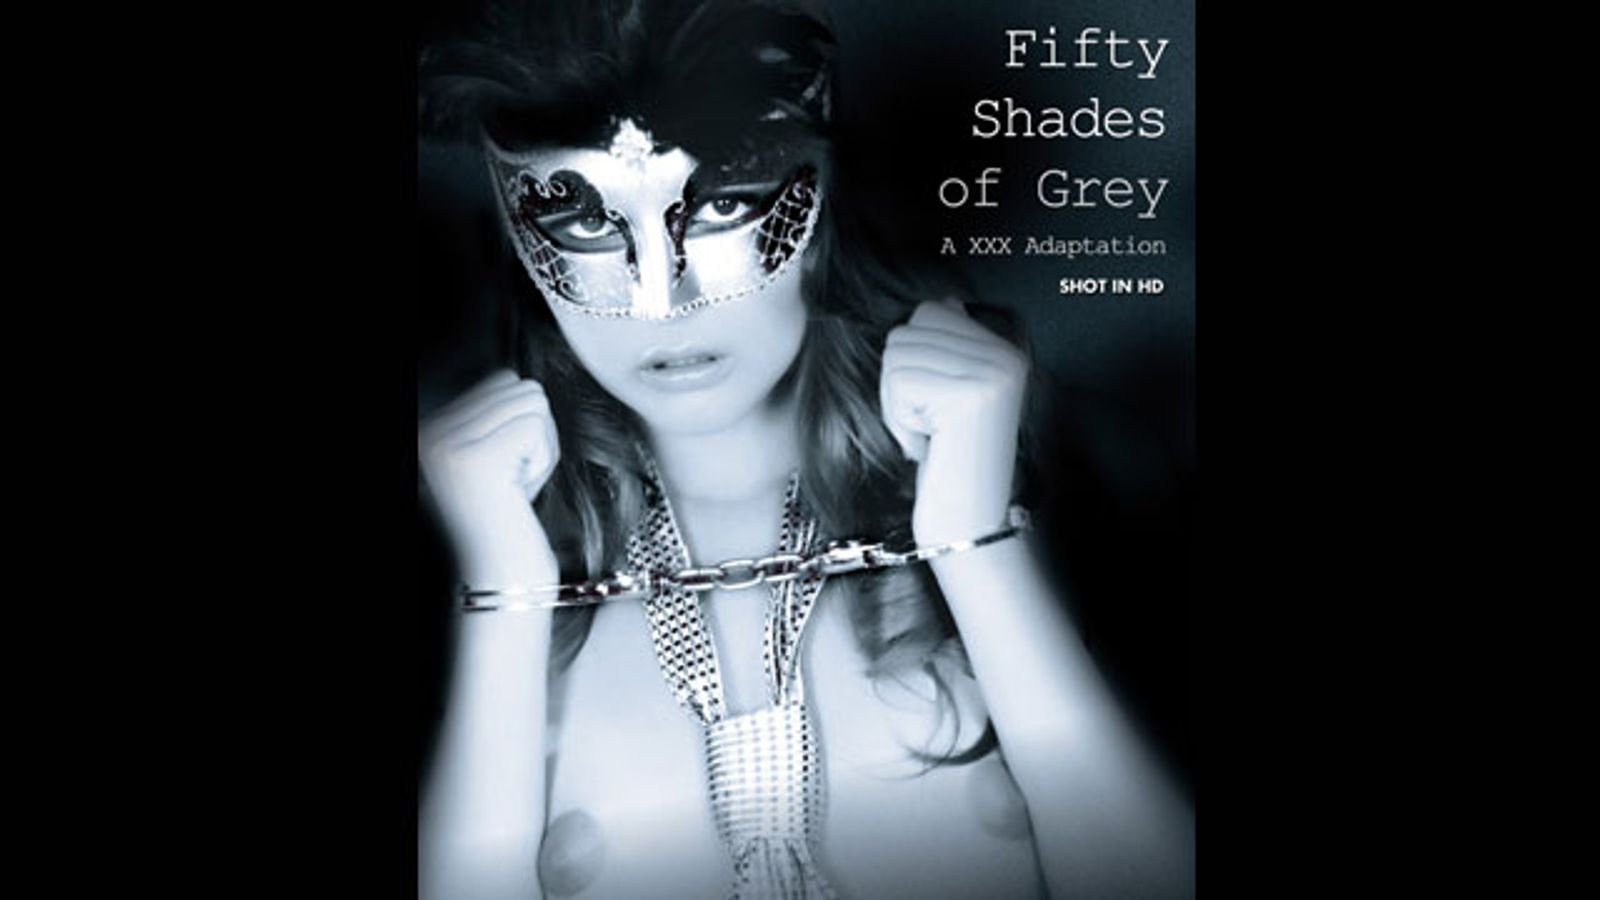 Smash Pictures Reveals 'Fifty Shades' Box Art